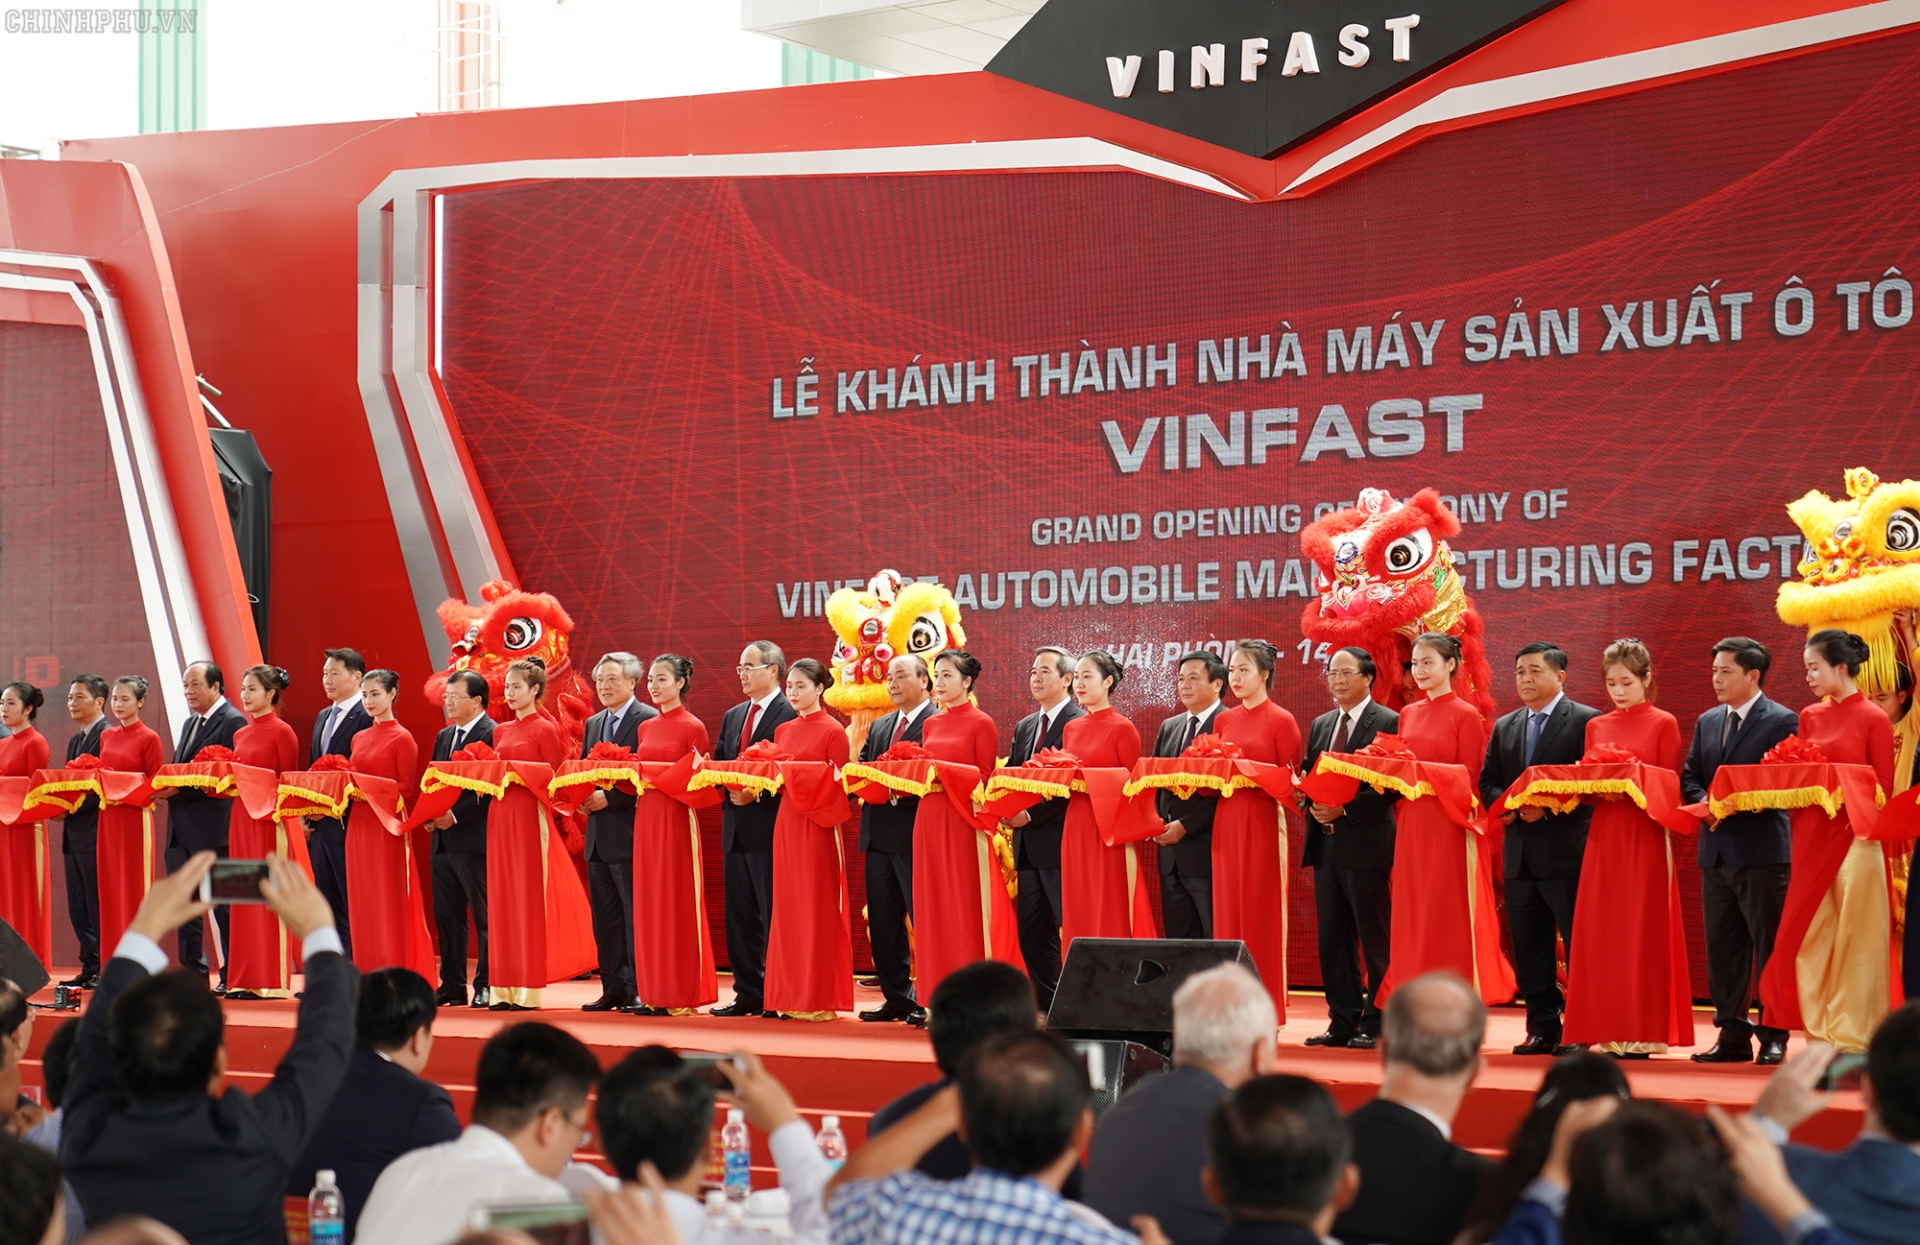 VinFast makes a miracle for automobile industry